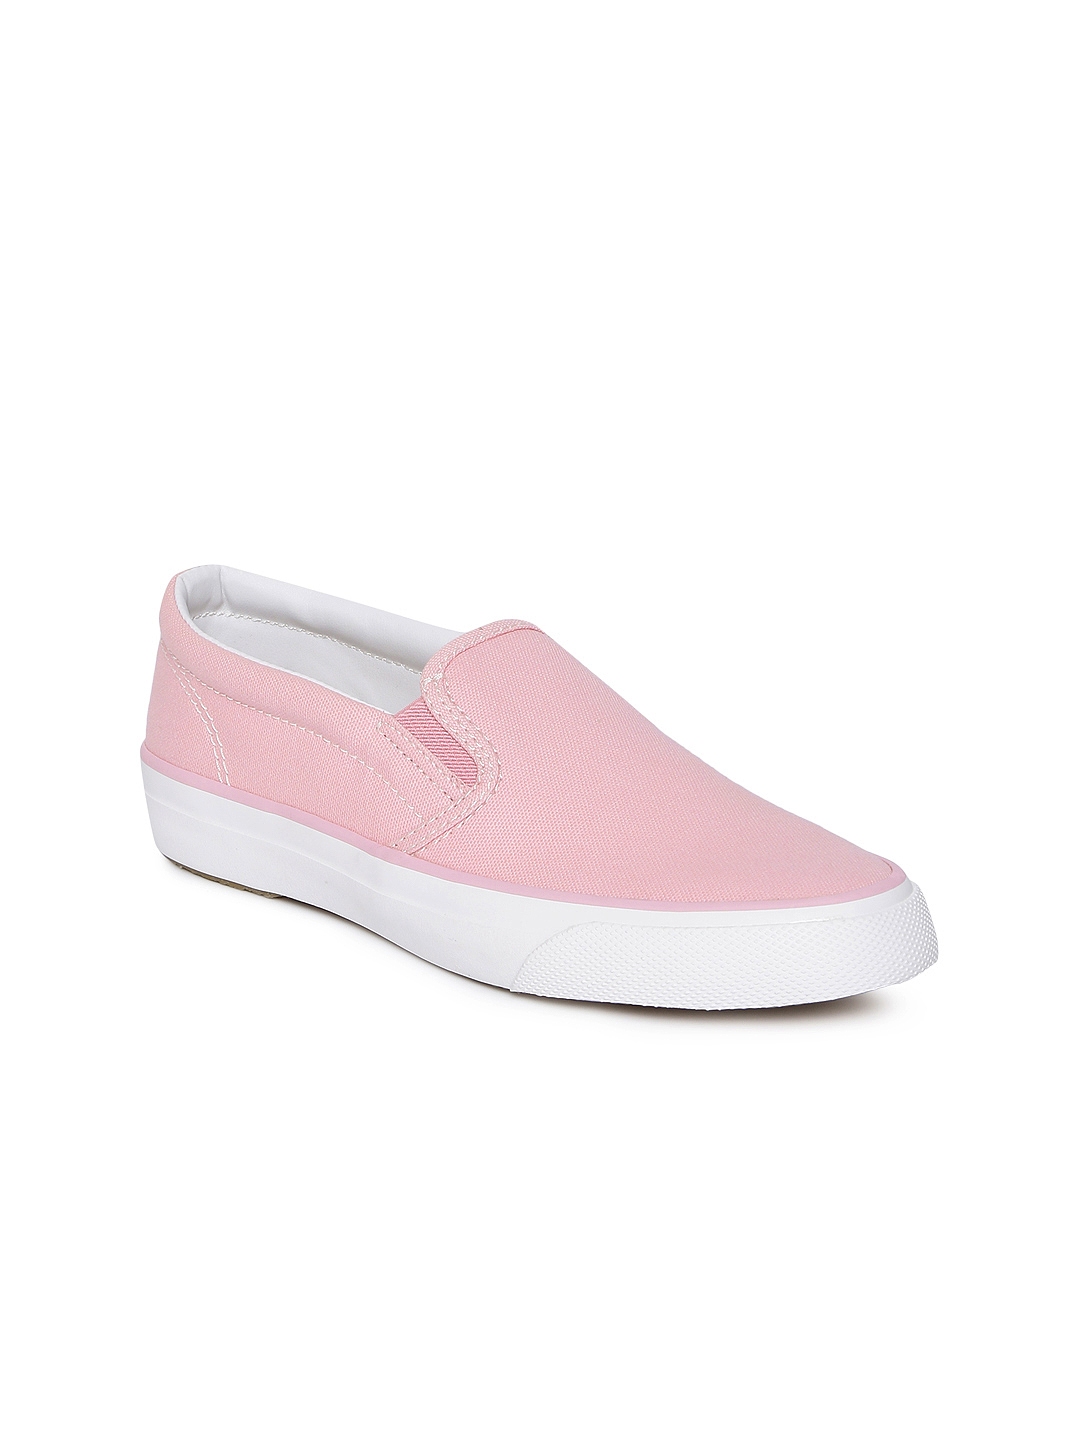 Buy Keds Women Pink Solid Slip On Sneakers - Casual Shoes for Women ...